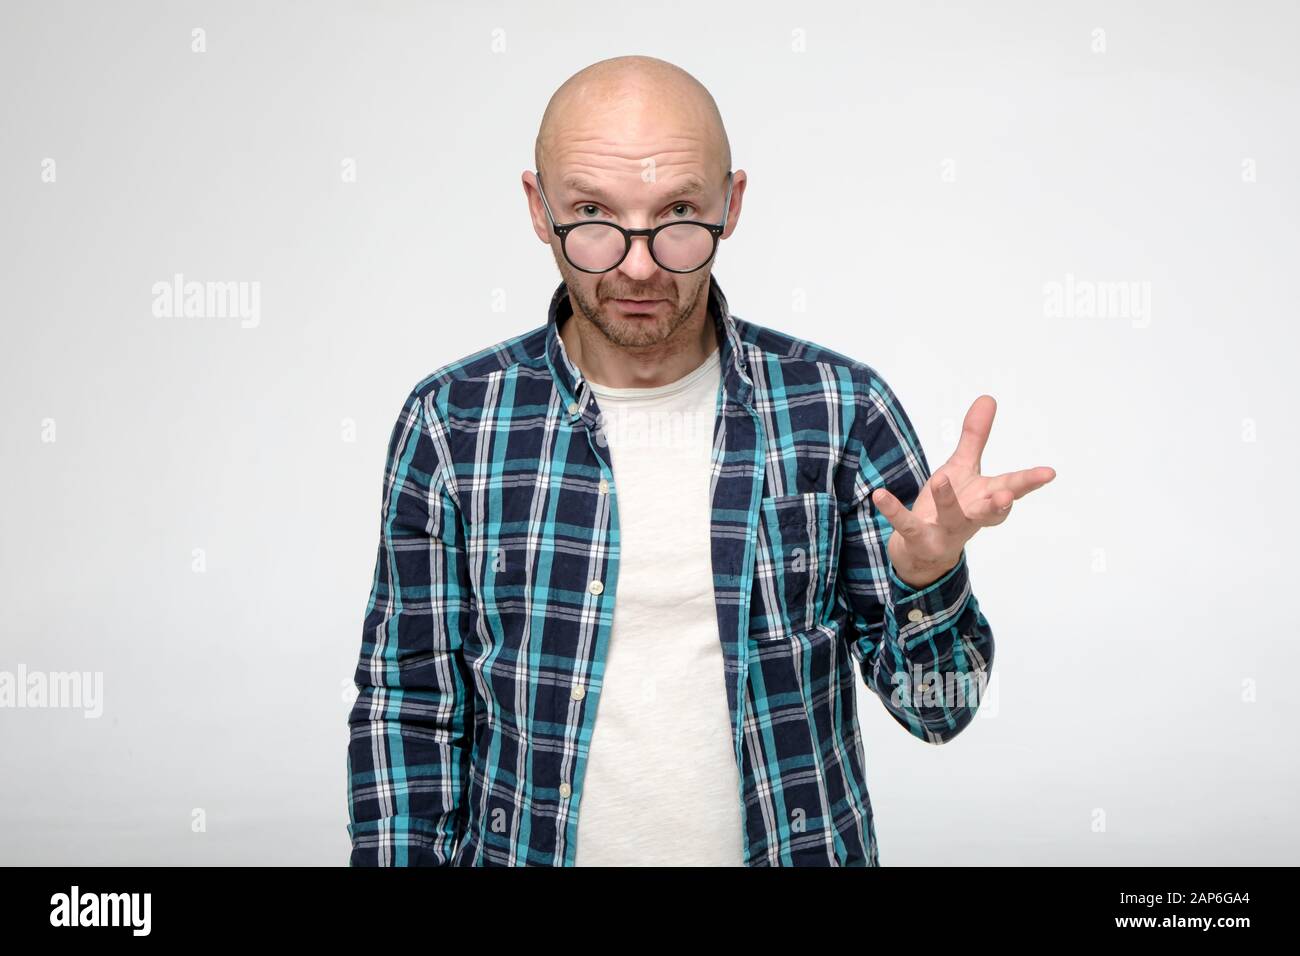 Bald, unshaven man looks inquiringly and calmly into the camera over glasses and makes a hand gesture. Stock Photo